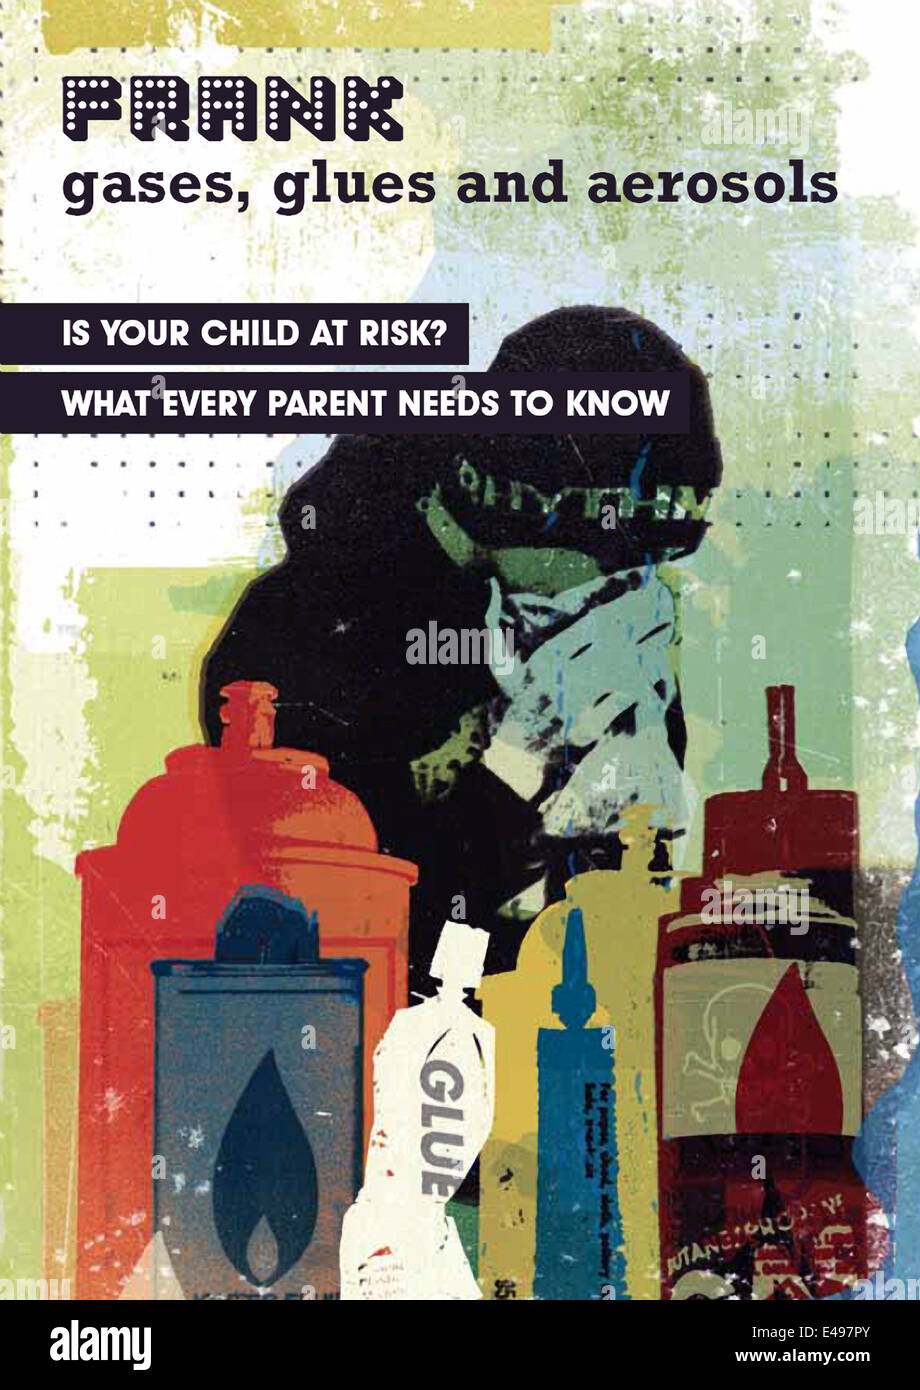 Drug information awareness raising poster released in January 2012 as part of the FRANK anti-drug campaign in the United Kingdom. The leaflet contains information about gases, glues and aerosols and is designed to educate parents and carers about the effects, dangers and signs of use. Stock Photo